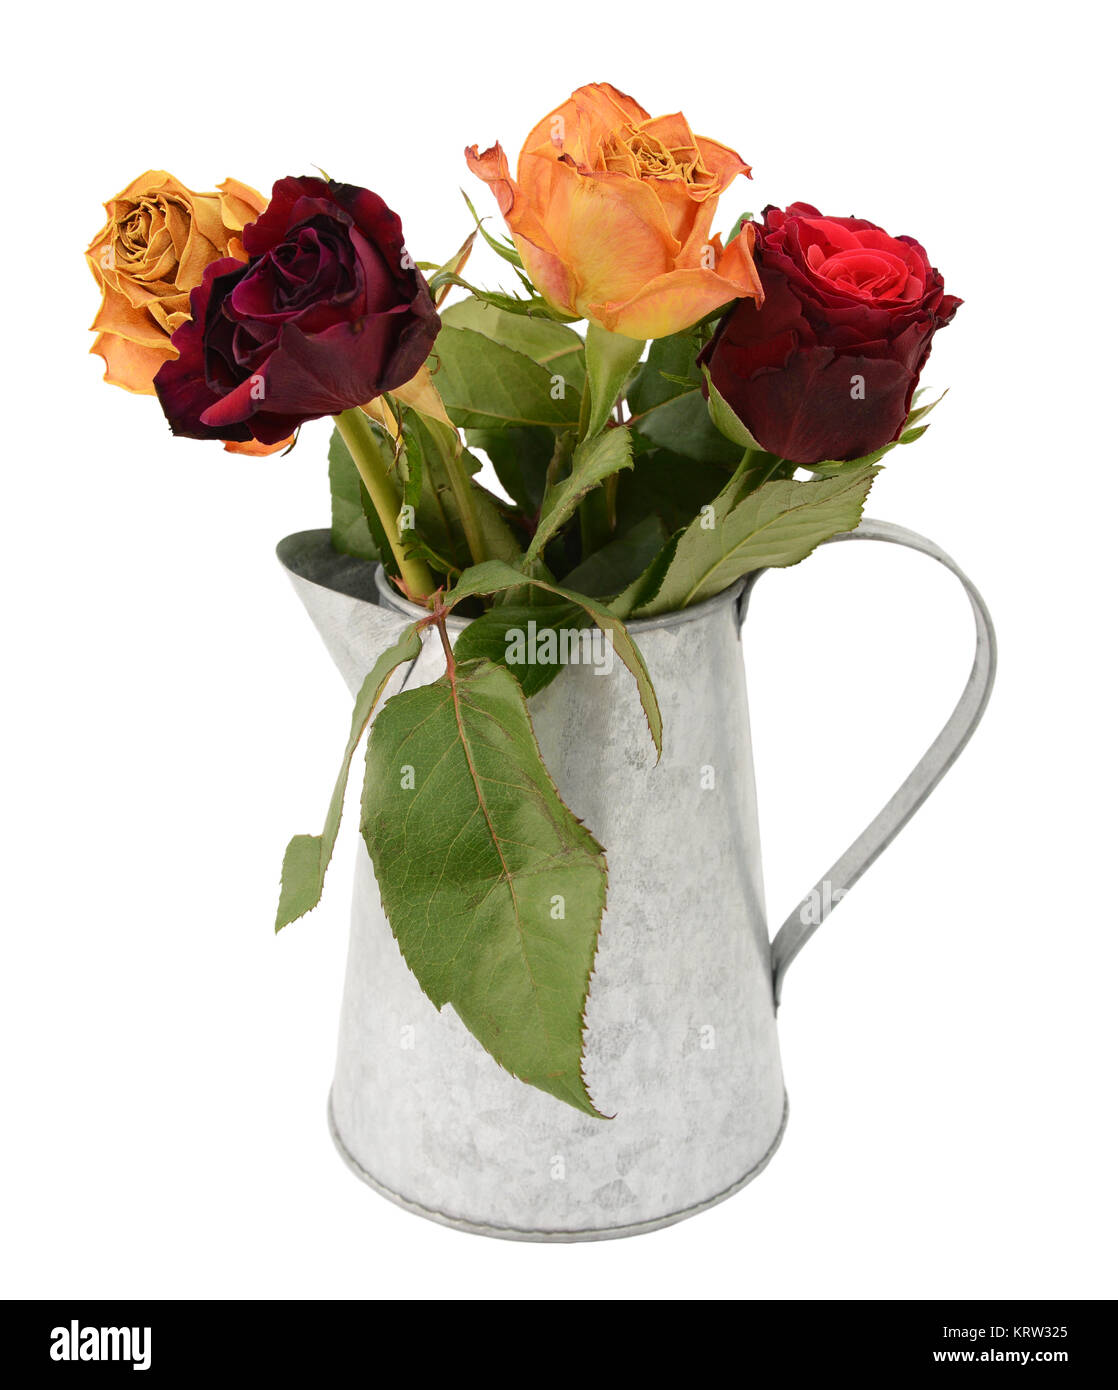 Four faded rose flowers in a metal jug Stock Photo